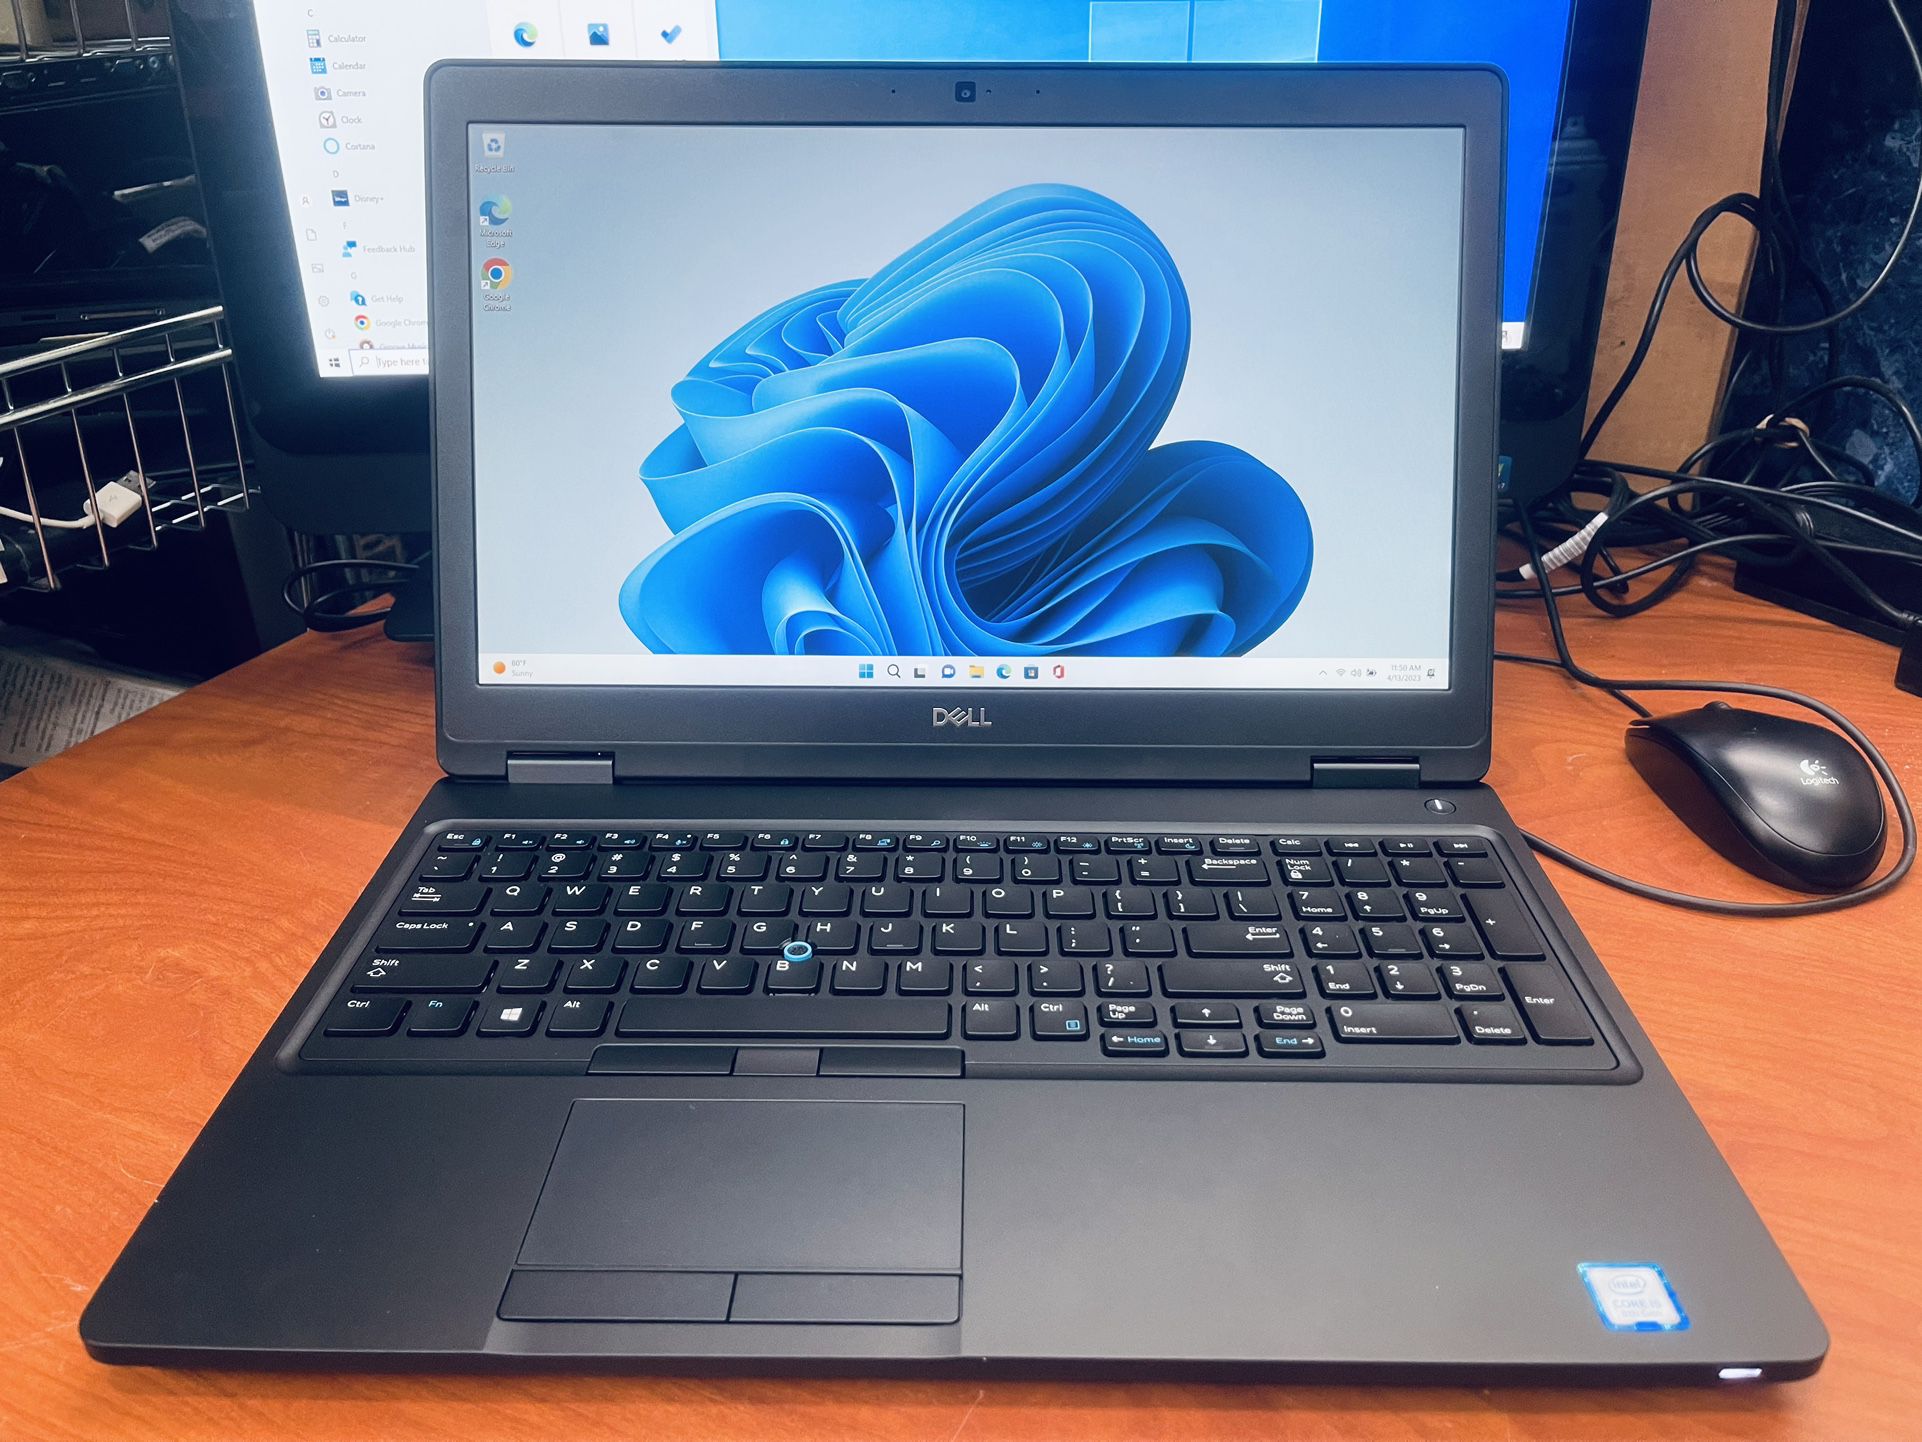 Dell Latitude 5590, 8th Gen Core i5, 16gb ram, 256gb SSD, Excellent Battery, AC adapter, window 11 Pro, really nice and reliable laptop for home, offi